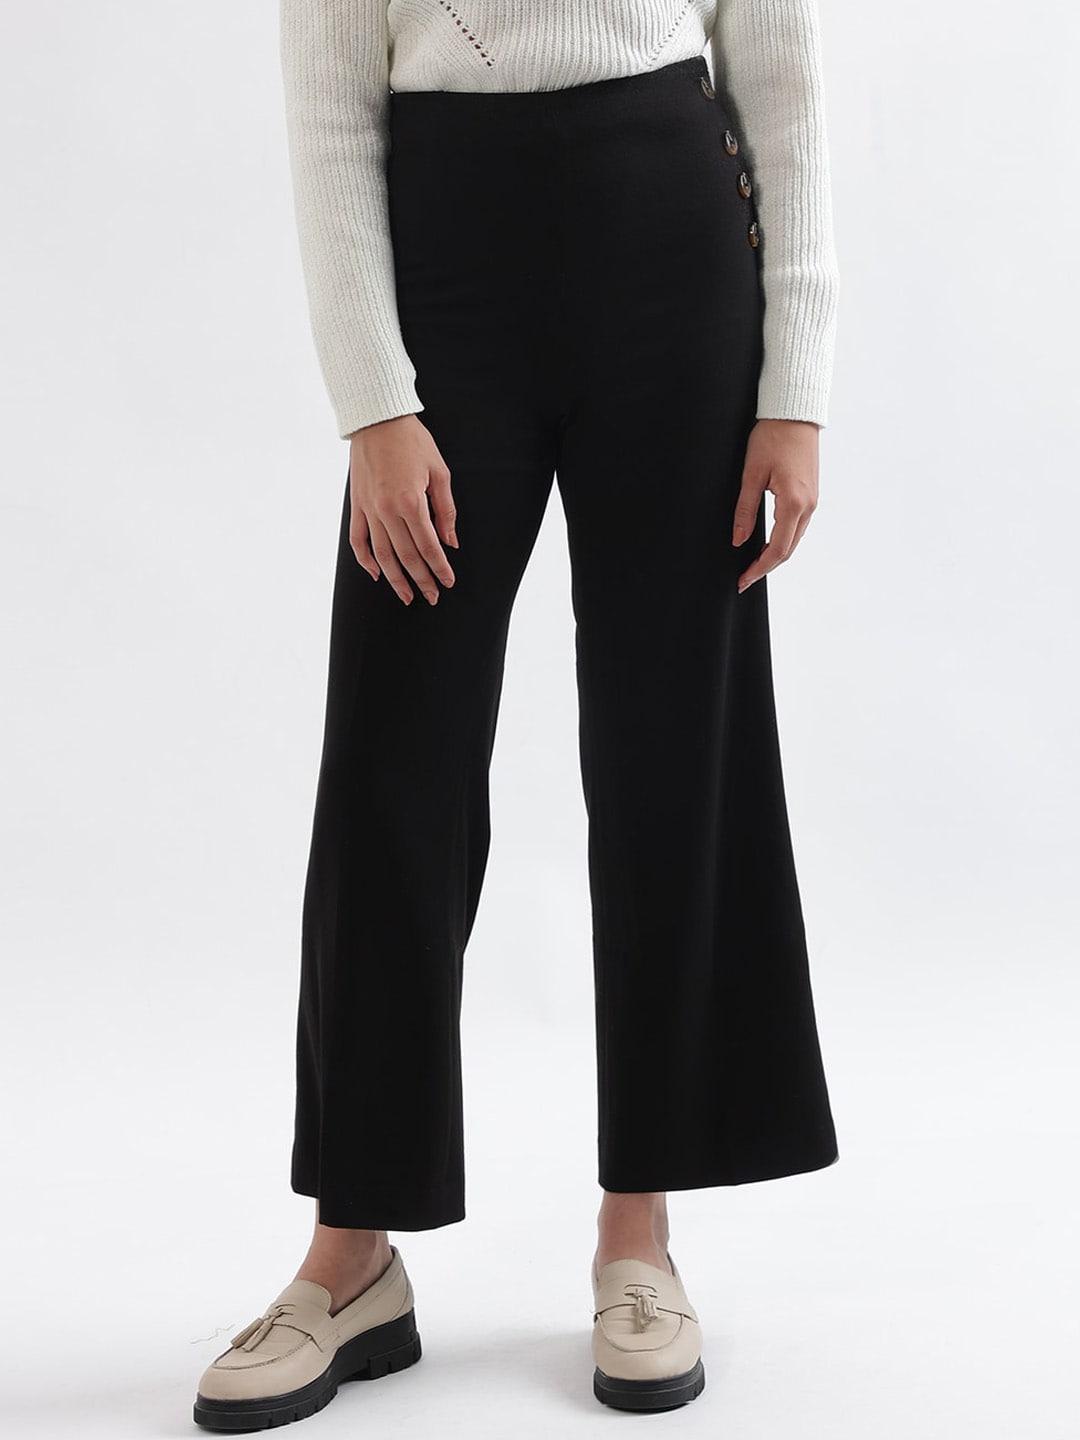 centrestage women flared high-rise trousers